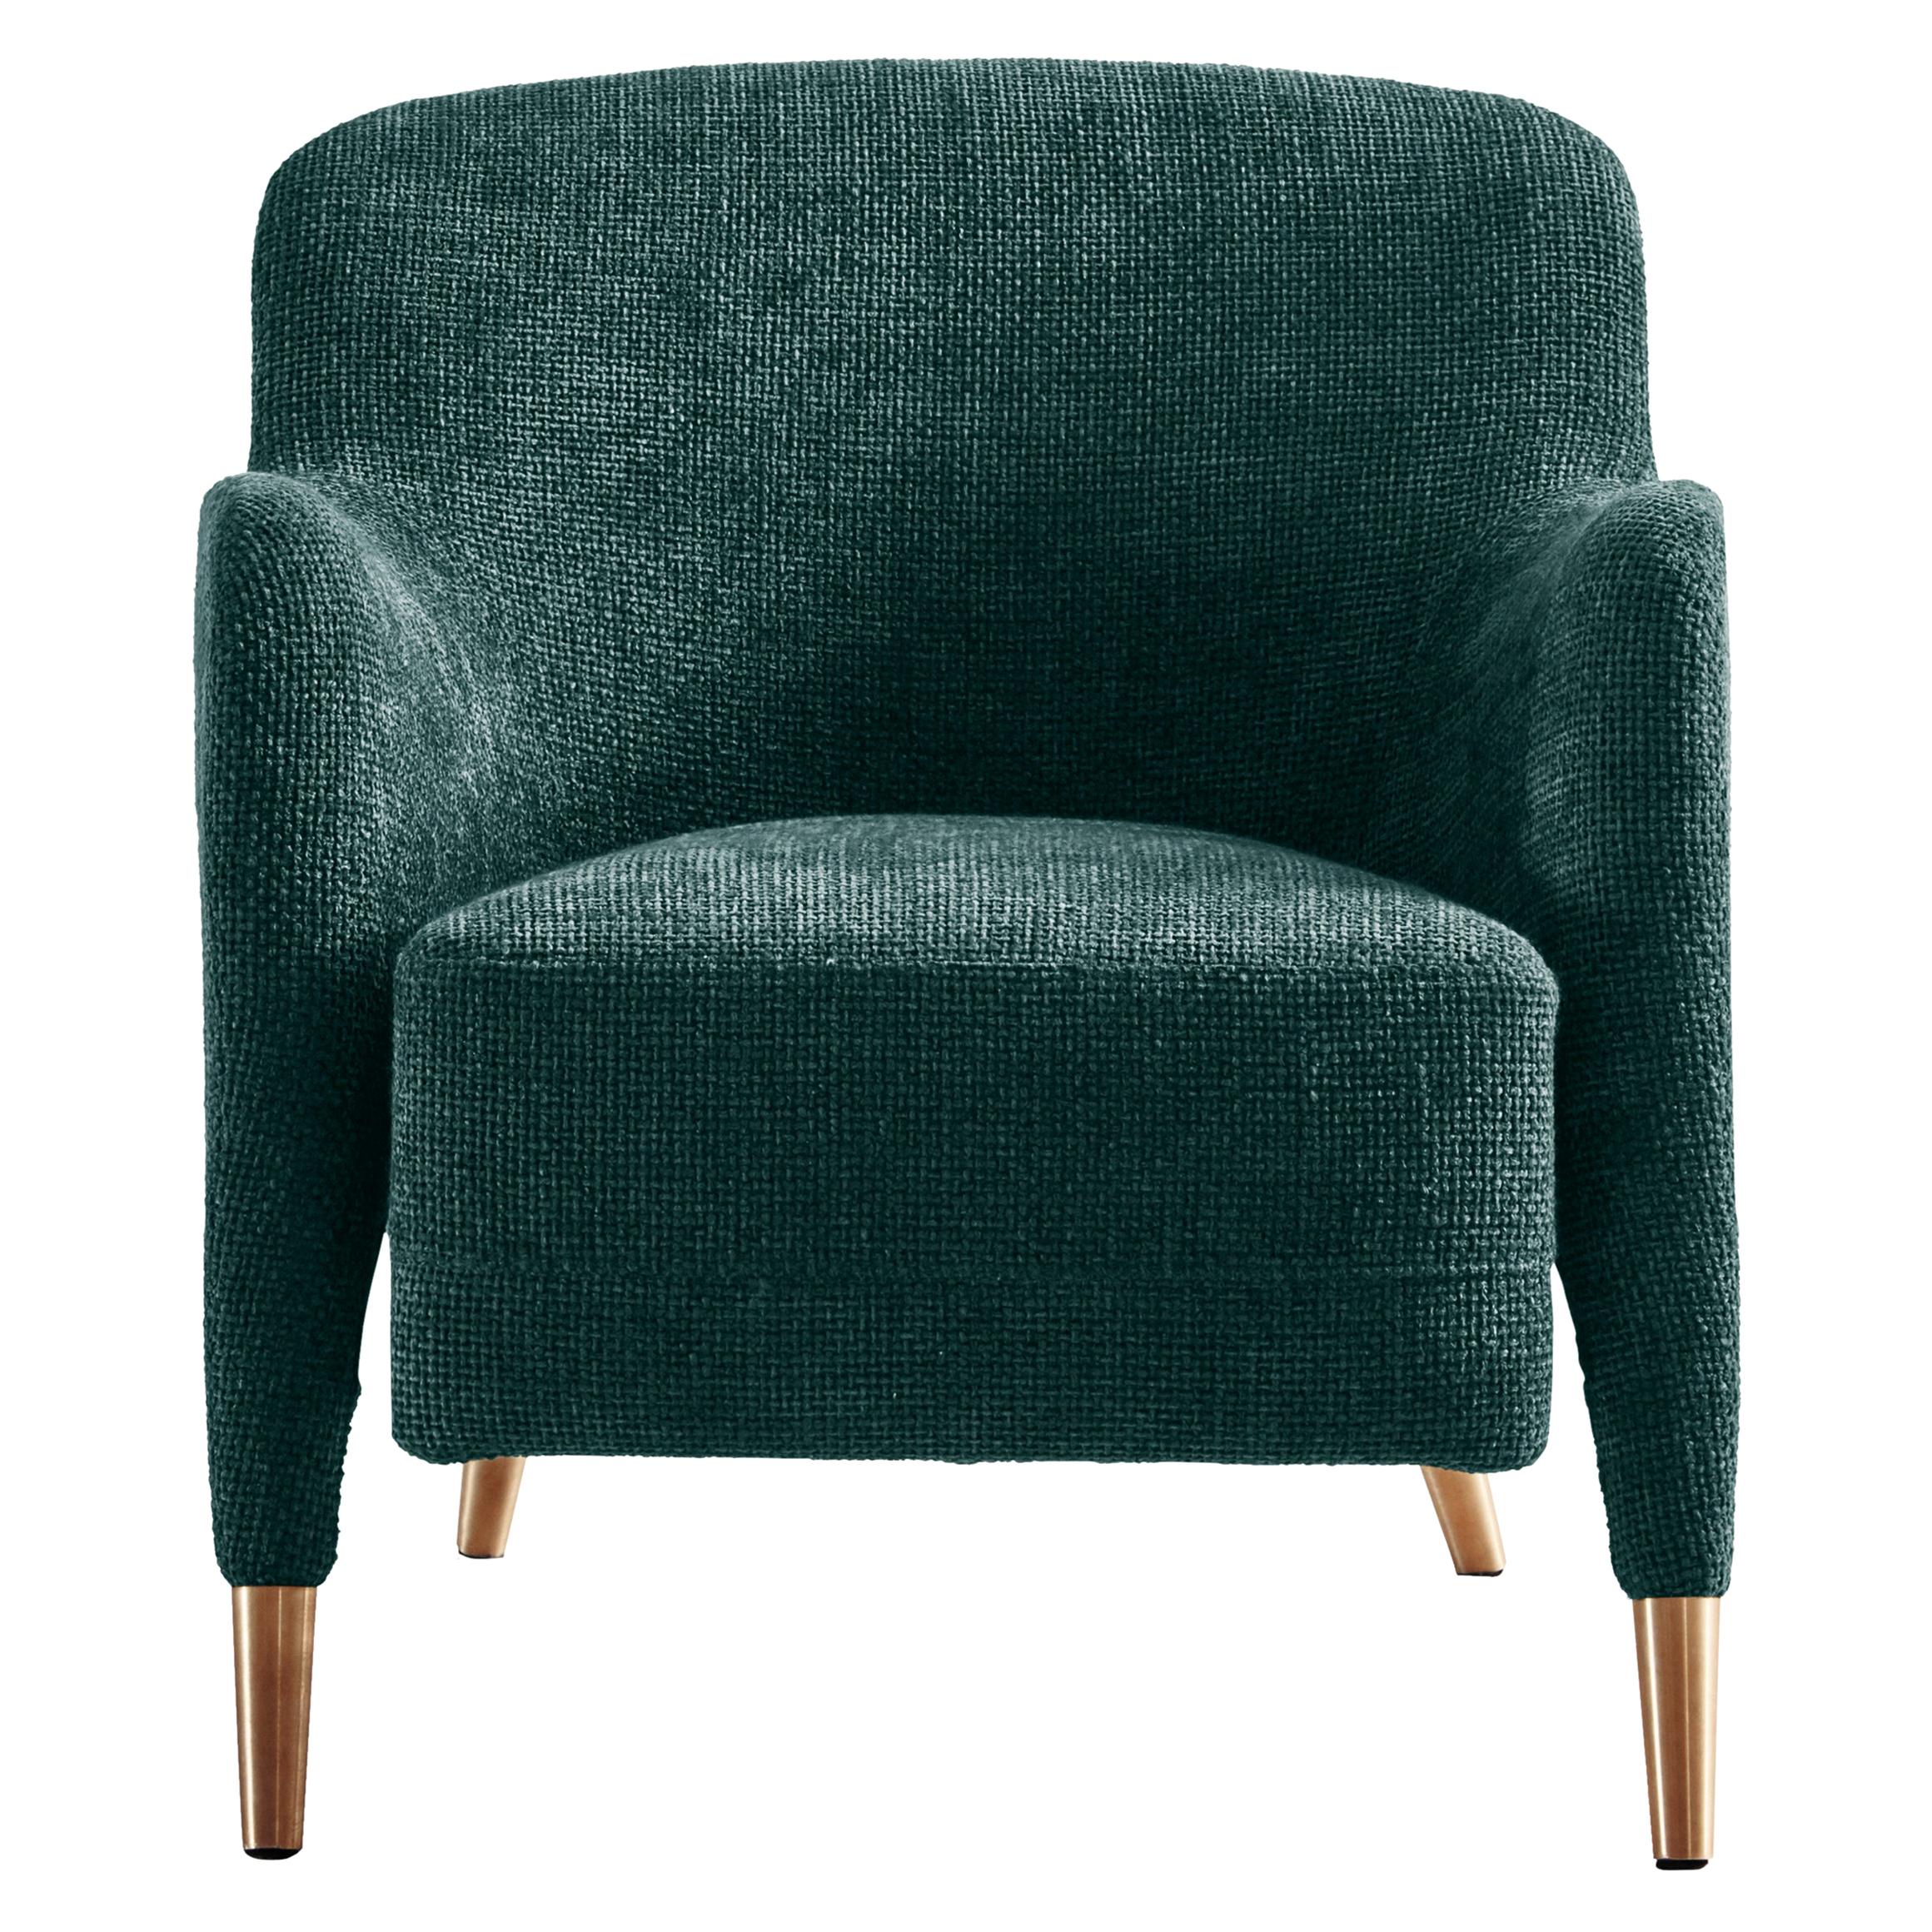 Armchair in Boucle Fabric Molteni&C by Gio Ponti Design D.151.4 - made in Italy